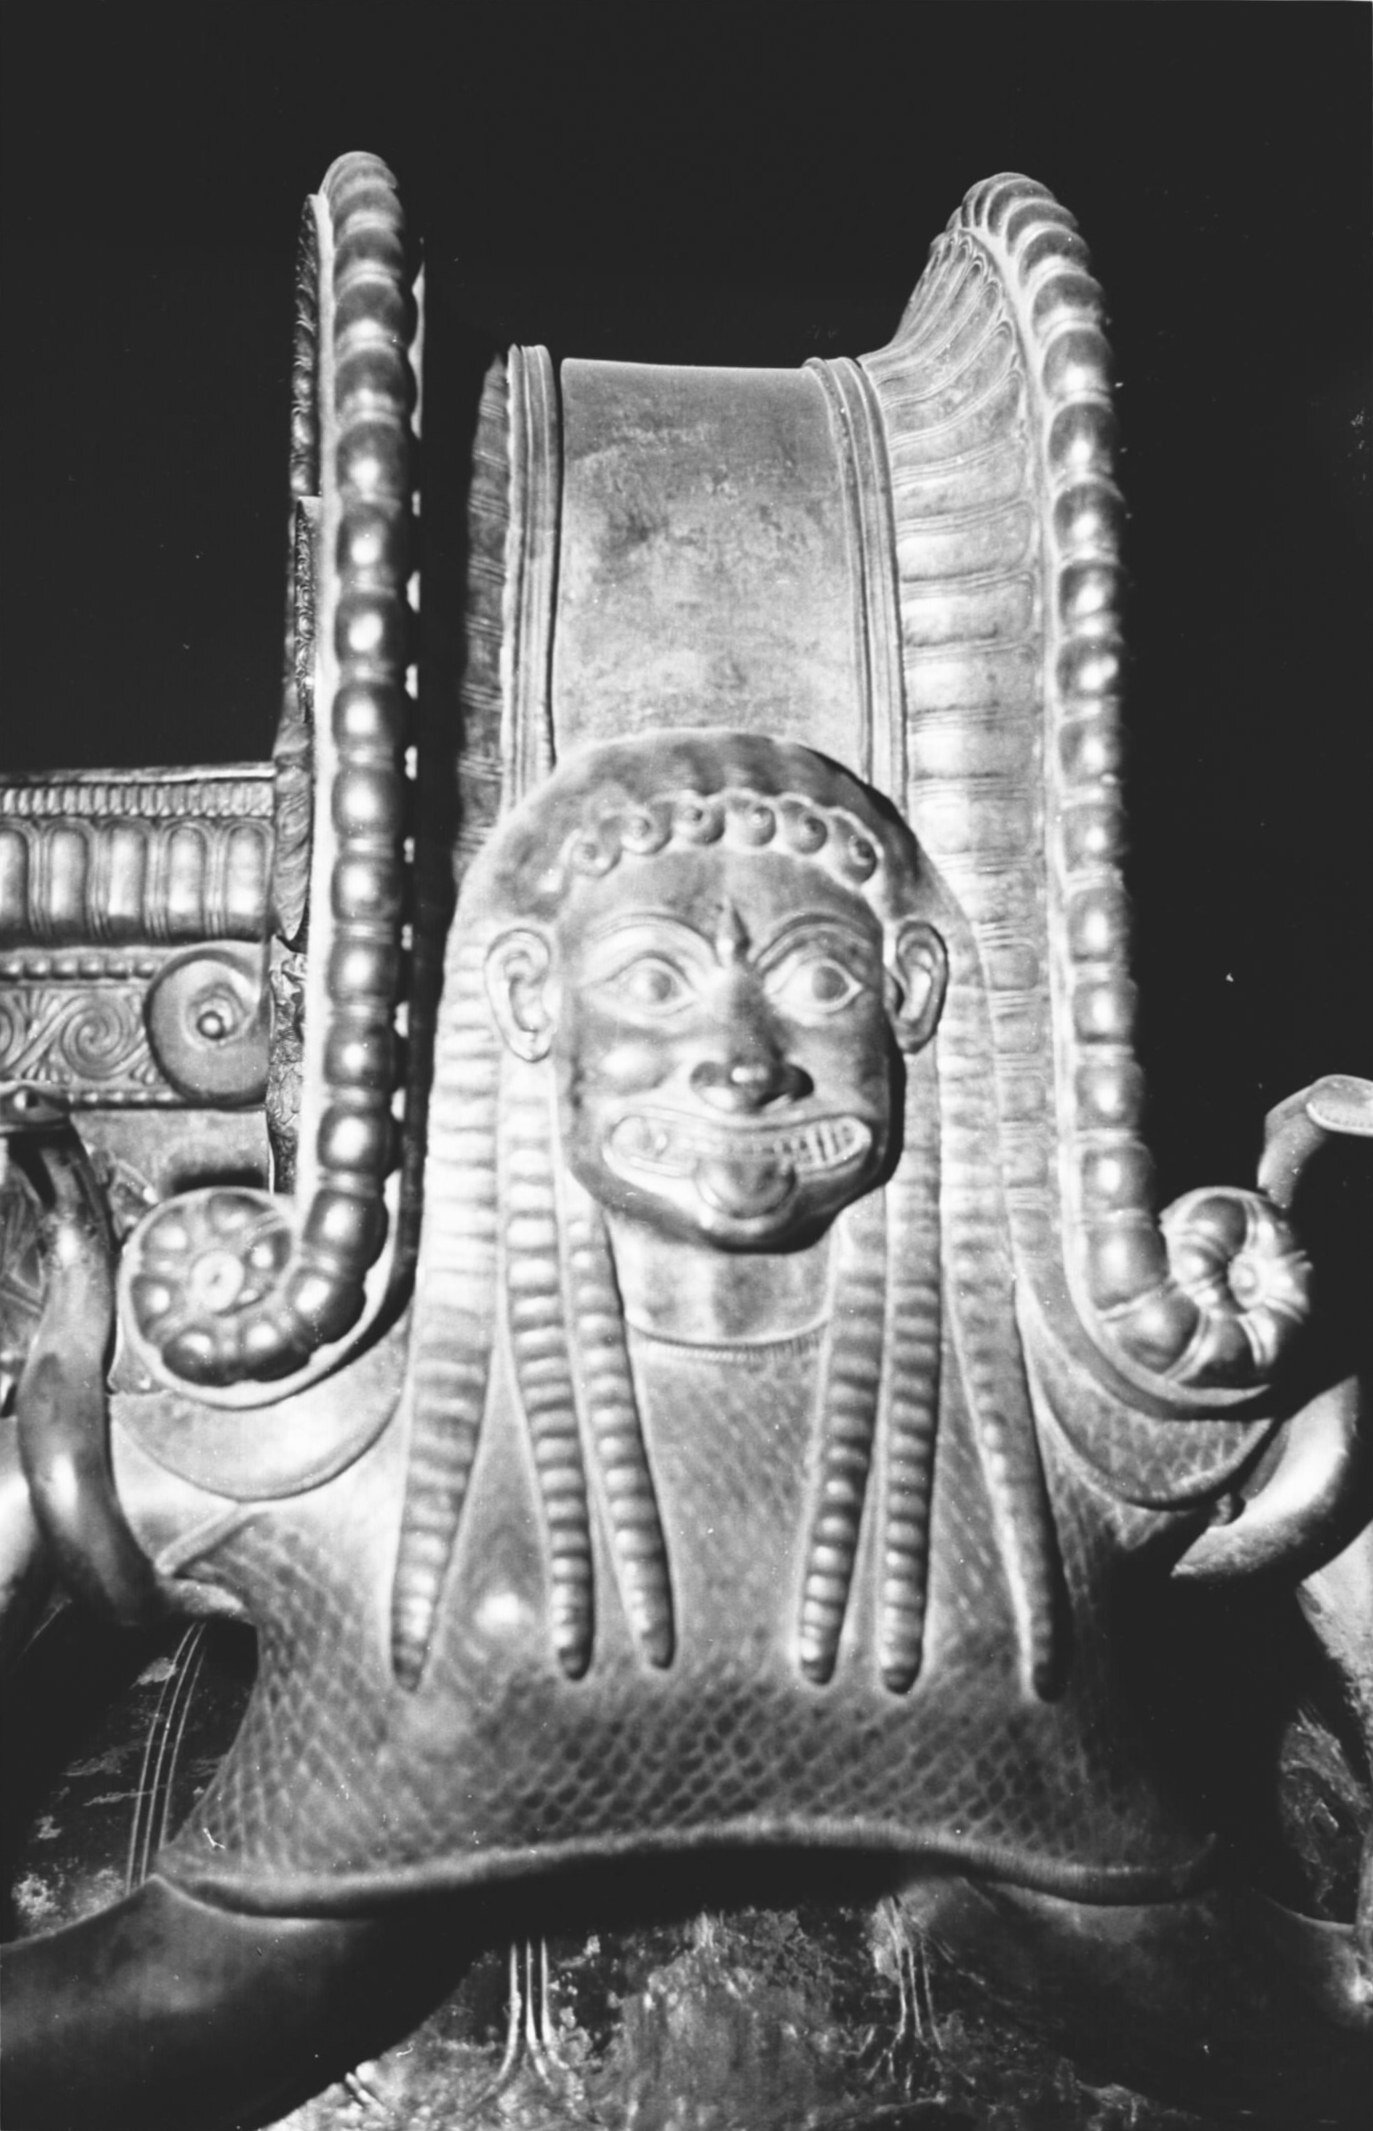 A Gorgon head on the outside of each of the Vix-krater's three handles, from the grave of the Celtic Lady of Vix, 510 BC